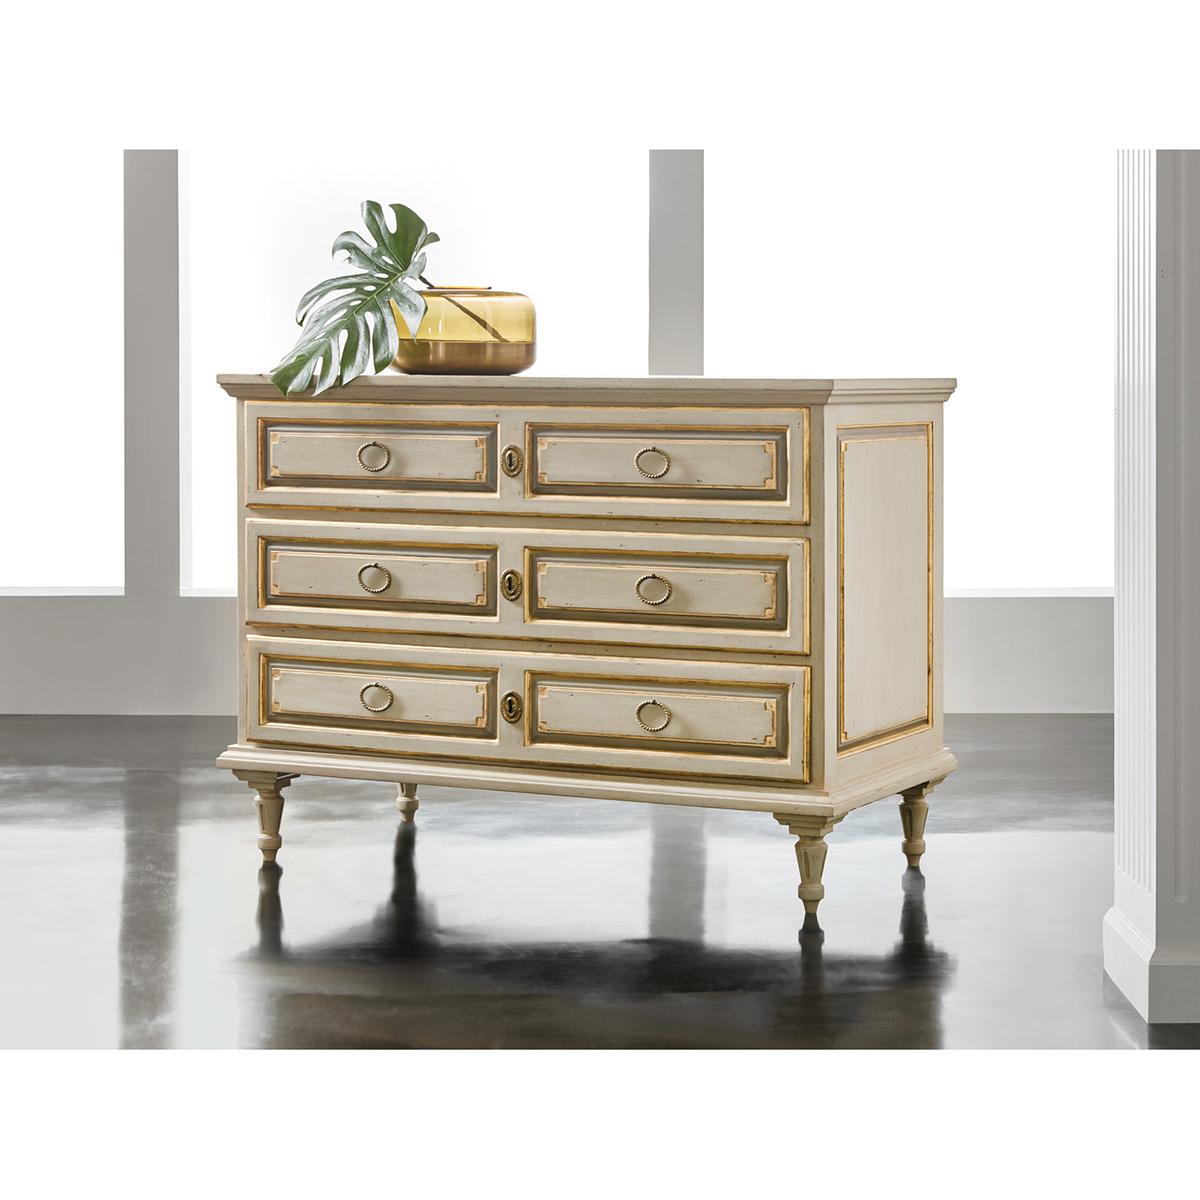 Large French Provincial Painted Commode. This French Directoire style provincial commode has an antiqued hand-painted finish with a rectangular molded top above three long paneled drawers with gilded trim, with paneled sides also with gilded trim,